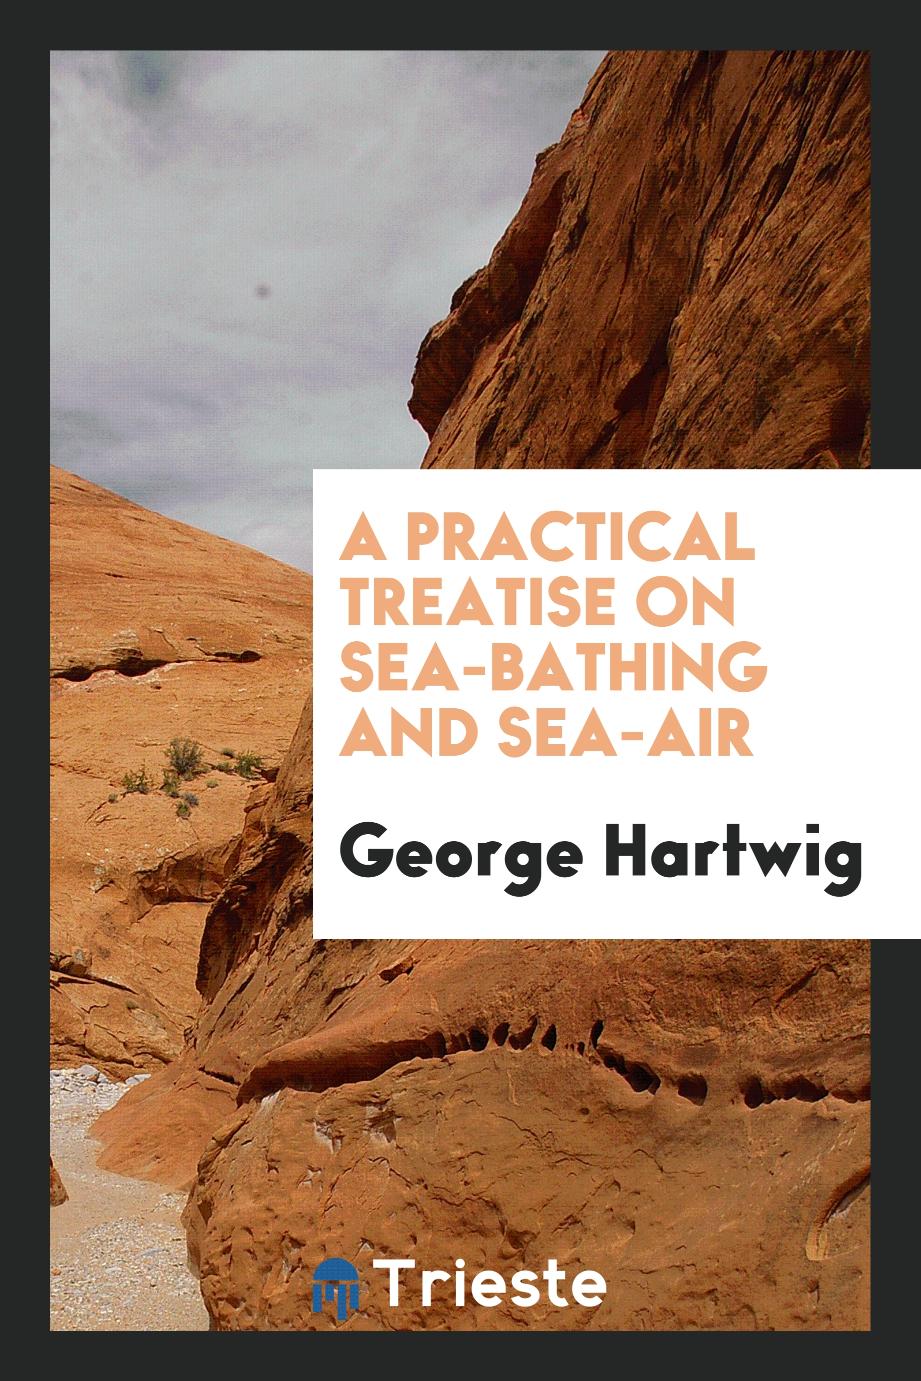 A Practical Treatise on Sea-Bathing and Sea-Air